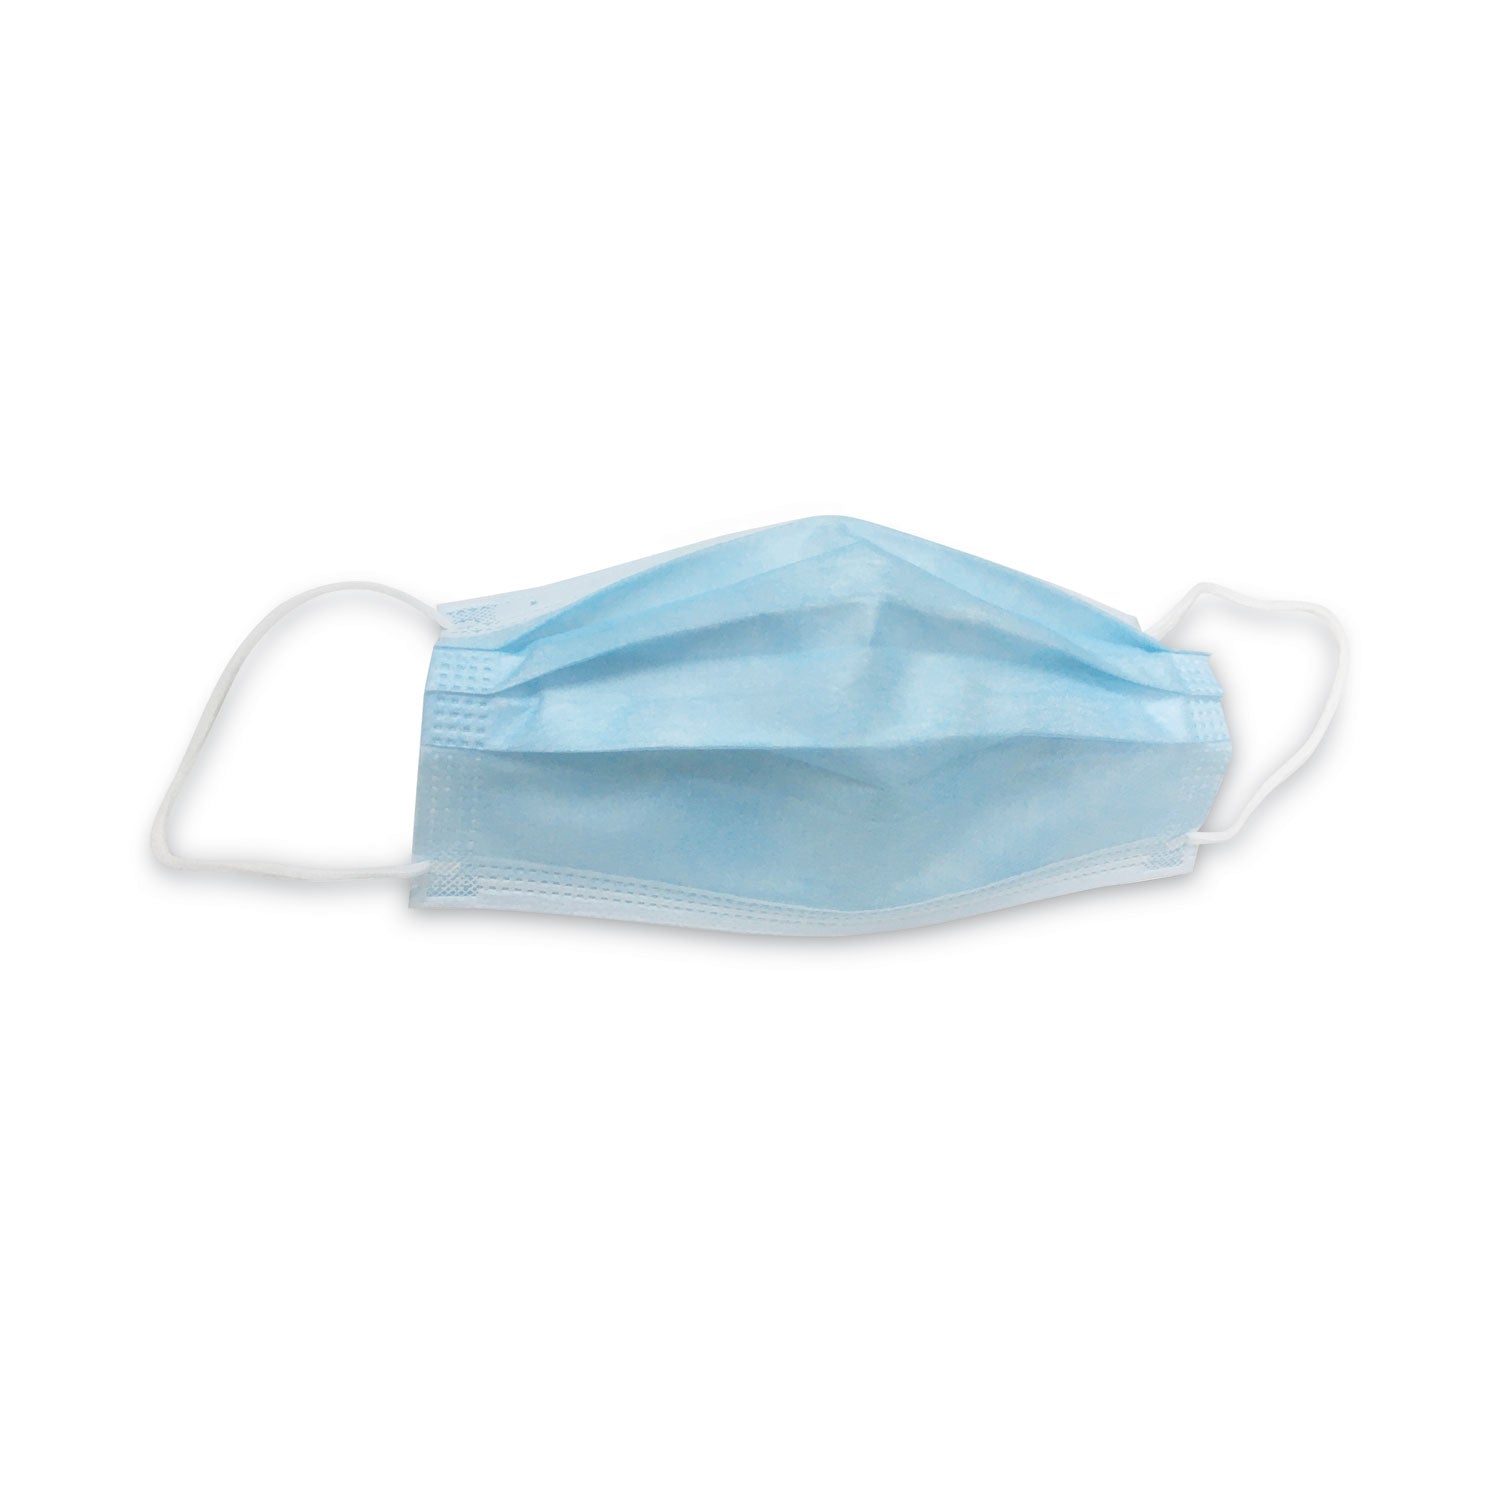 three-ply-general-use-face-mask-blue-white-2500-carton_tehms2500 - 2